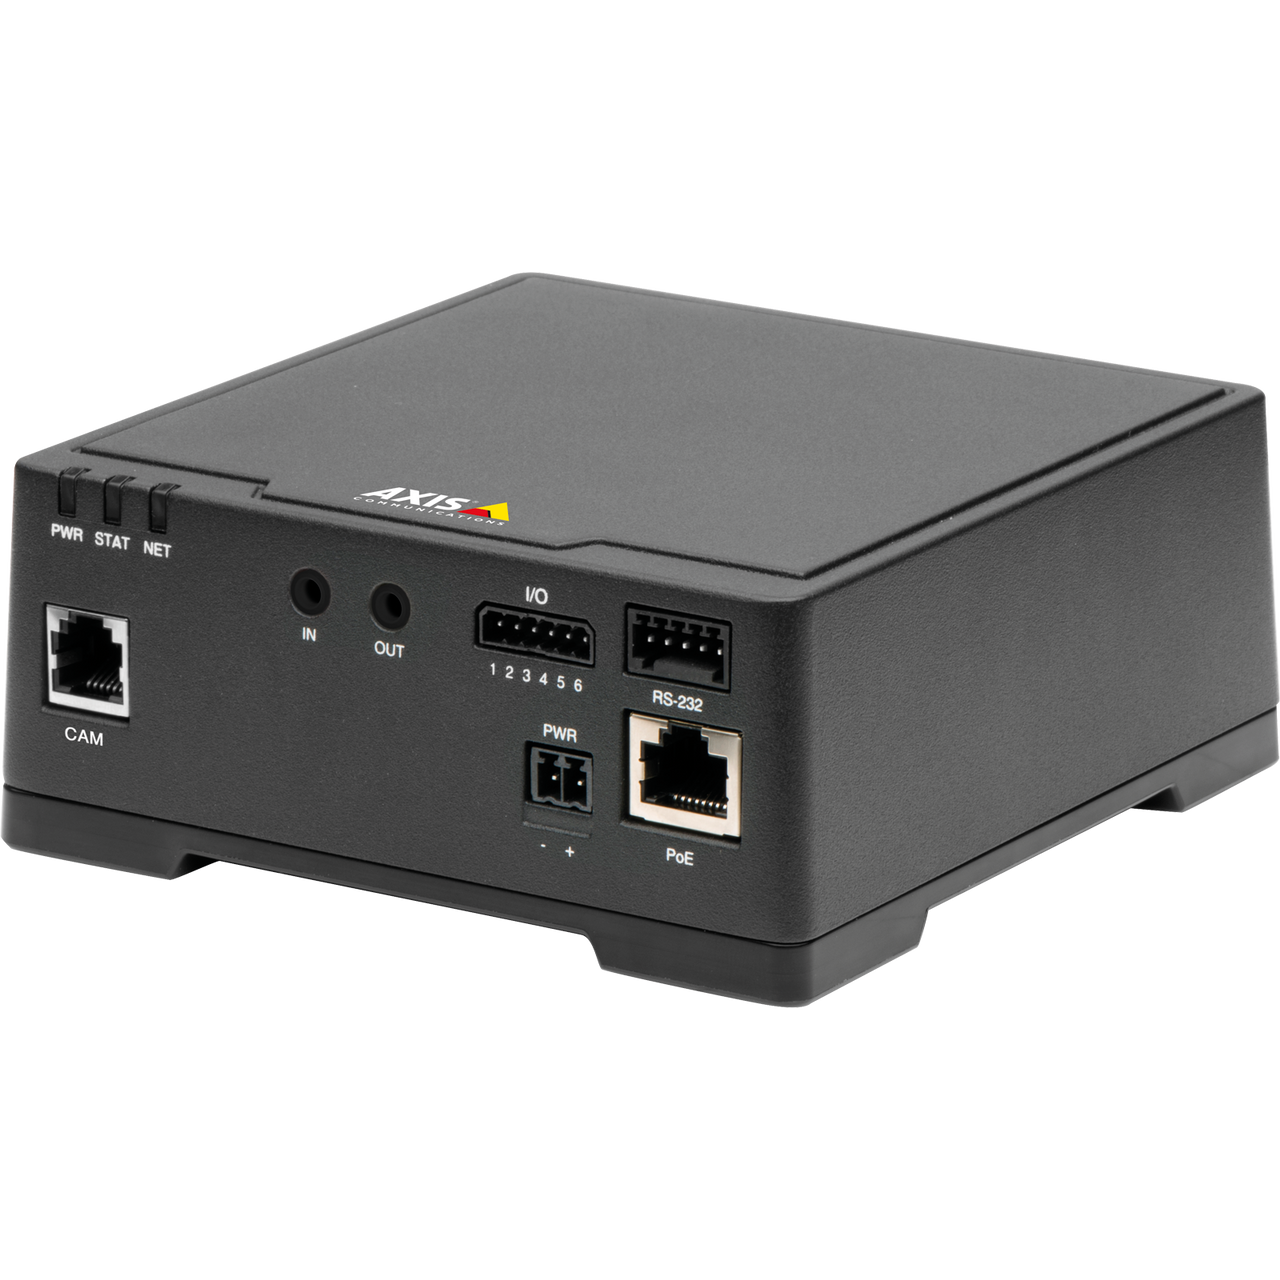 AXIS F41 MAIN UNIT Rugged design with WDR – Forensic Capture and HDTV 1080p